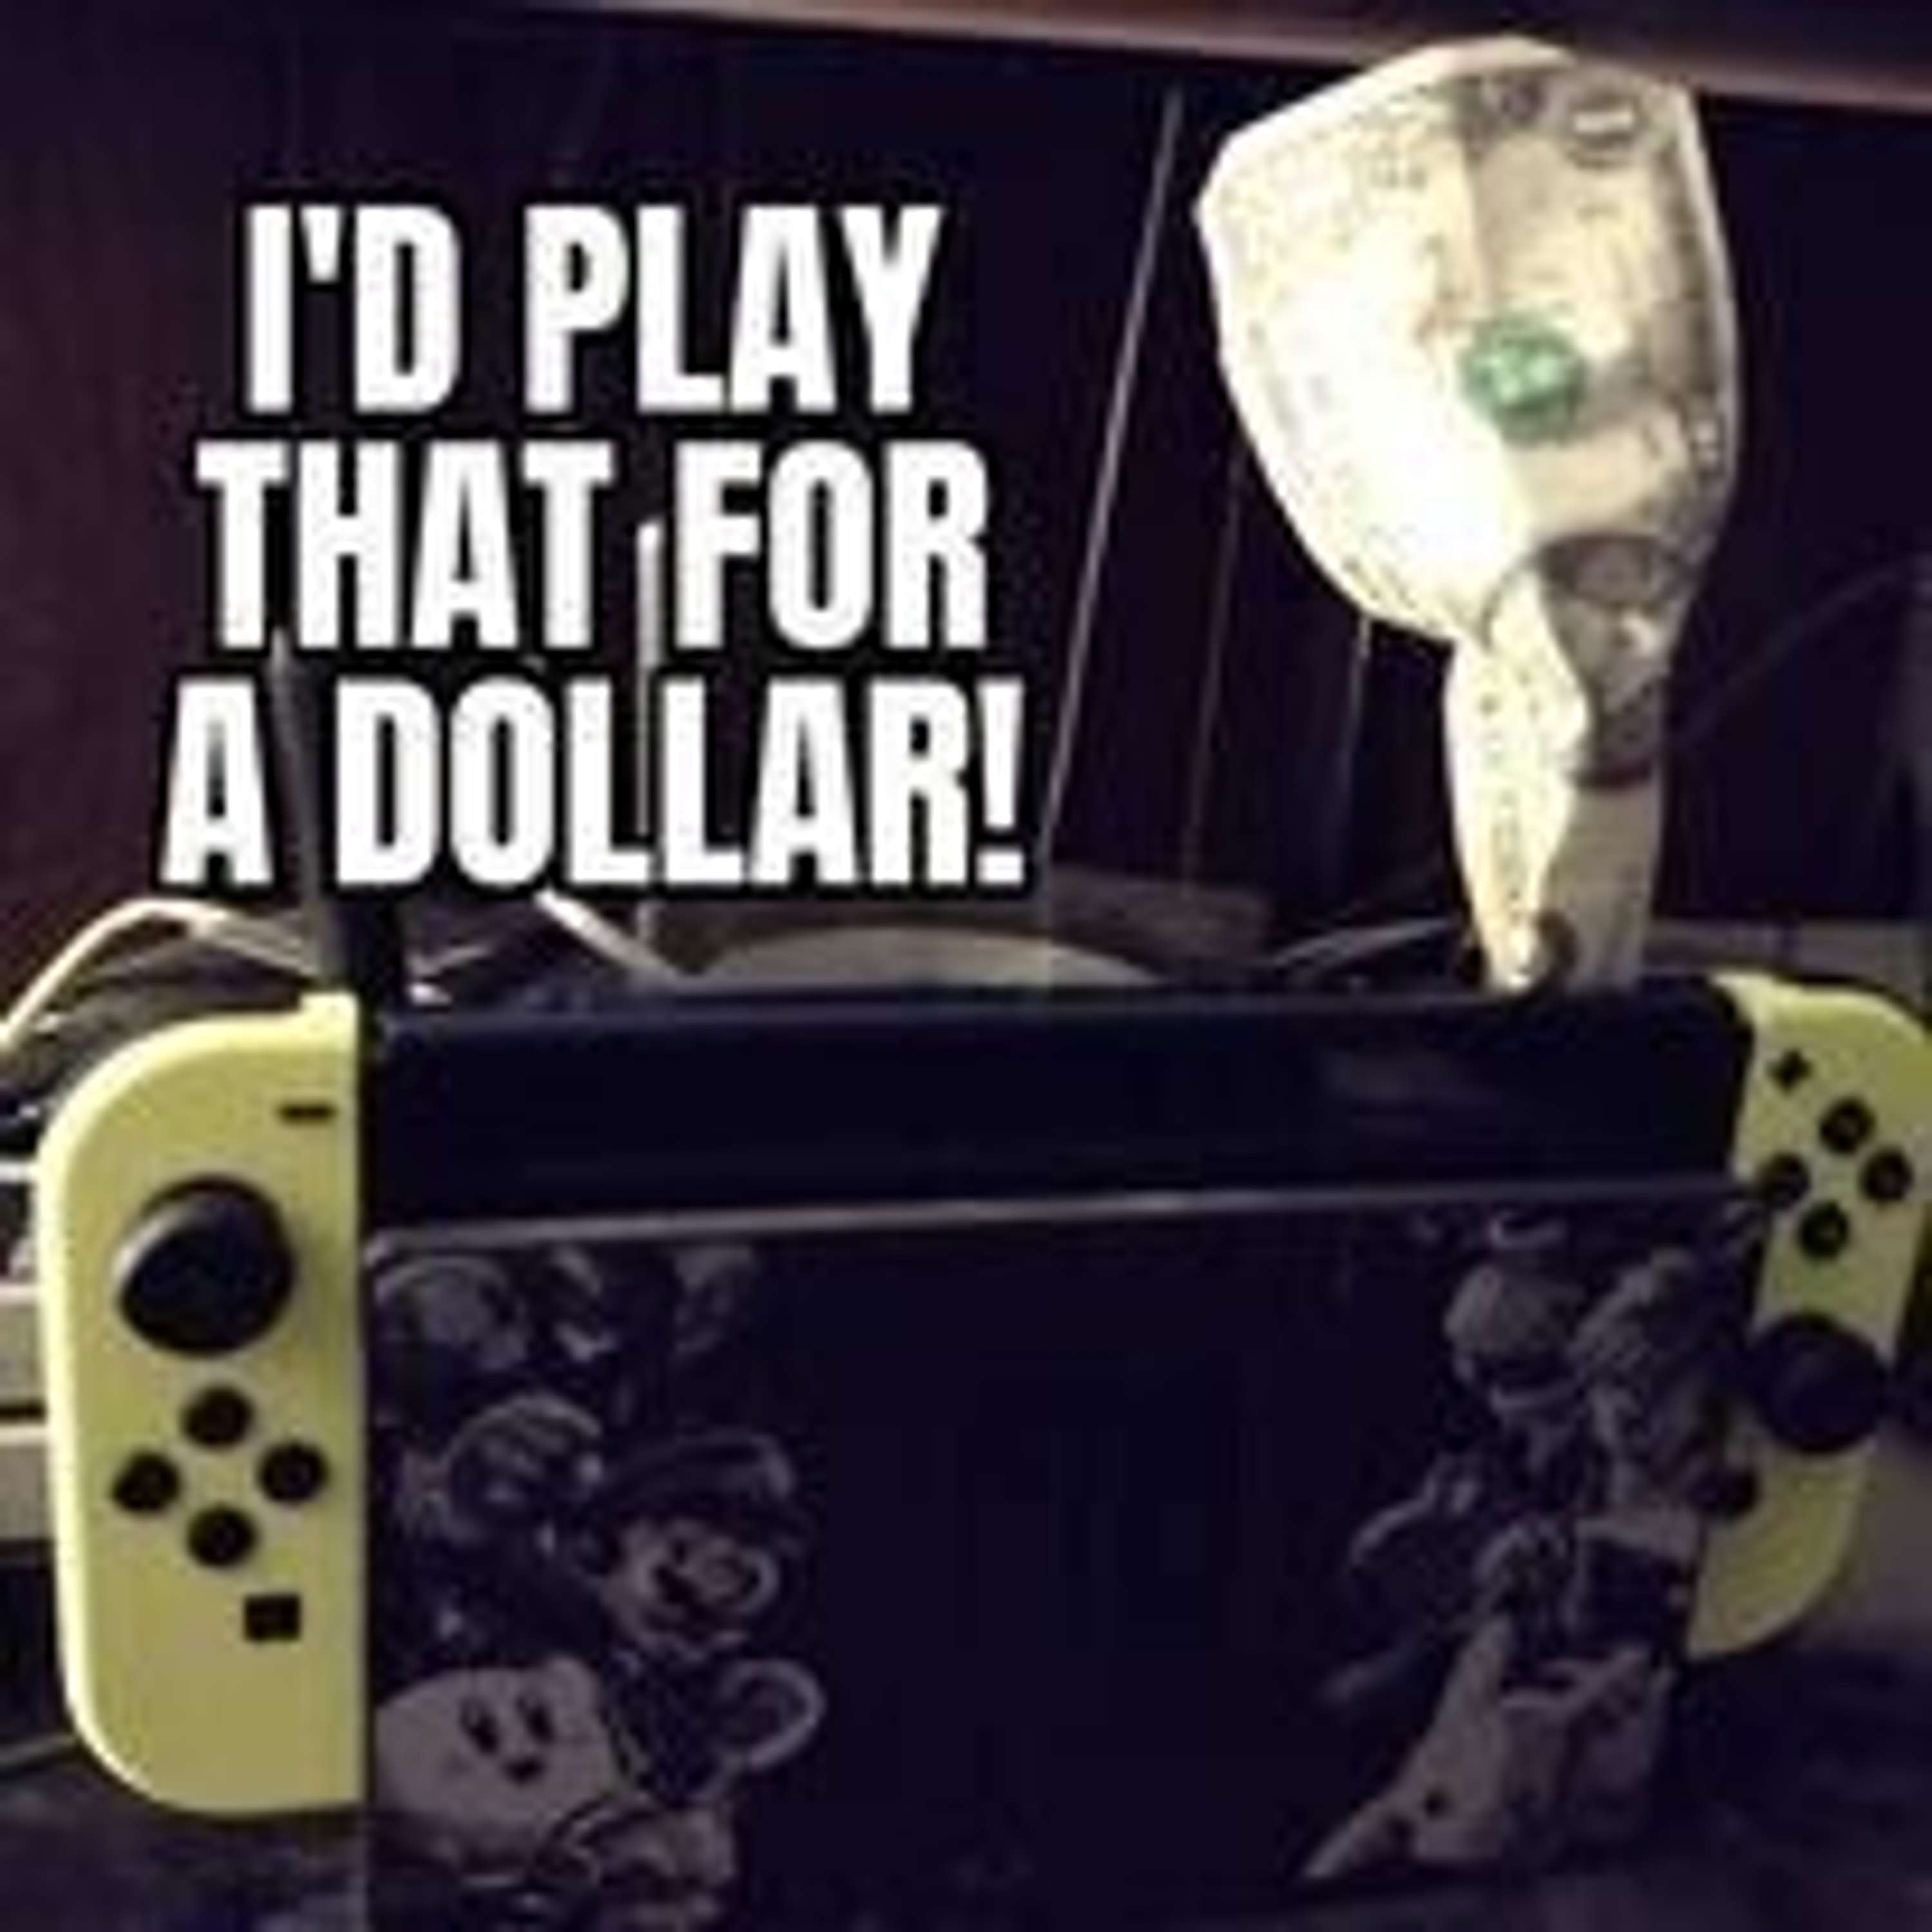 I’d Play That For A Dollar: The Nickel And Dime Tour